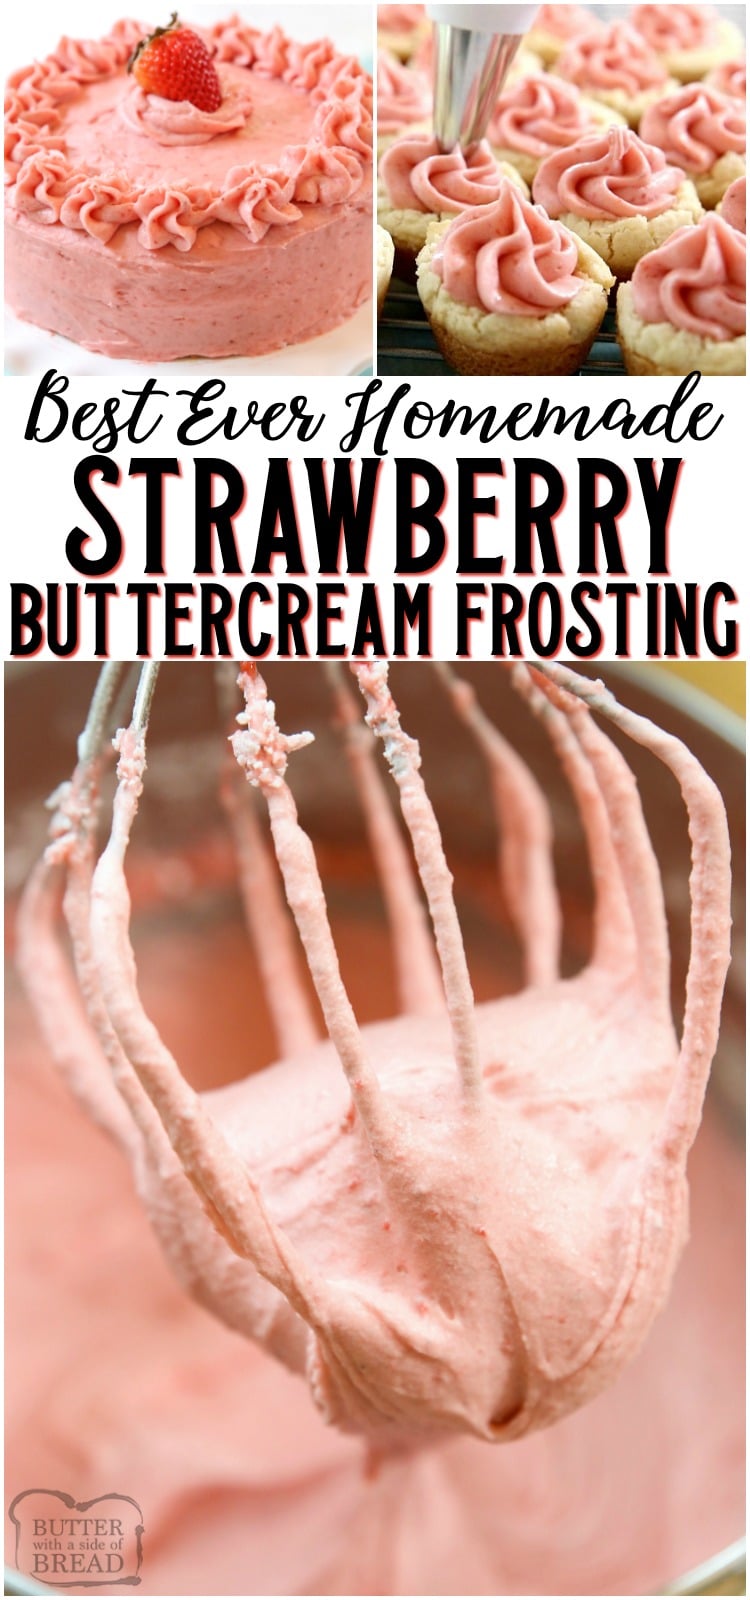 Strawberry Buttercream Frosting made with fresh strawberries with a perfect, bright strawberry flavor. This is the BEST strawberry frosting recipe ever. No coloring & goes wonderfully on cookies, cakes and cupcakes.